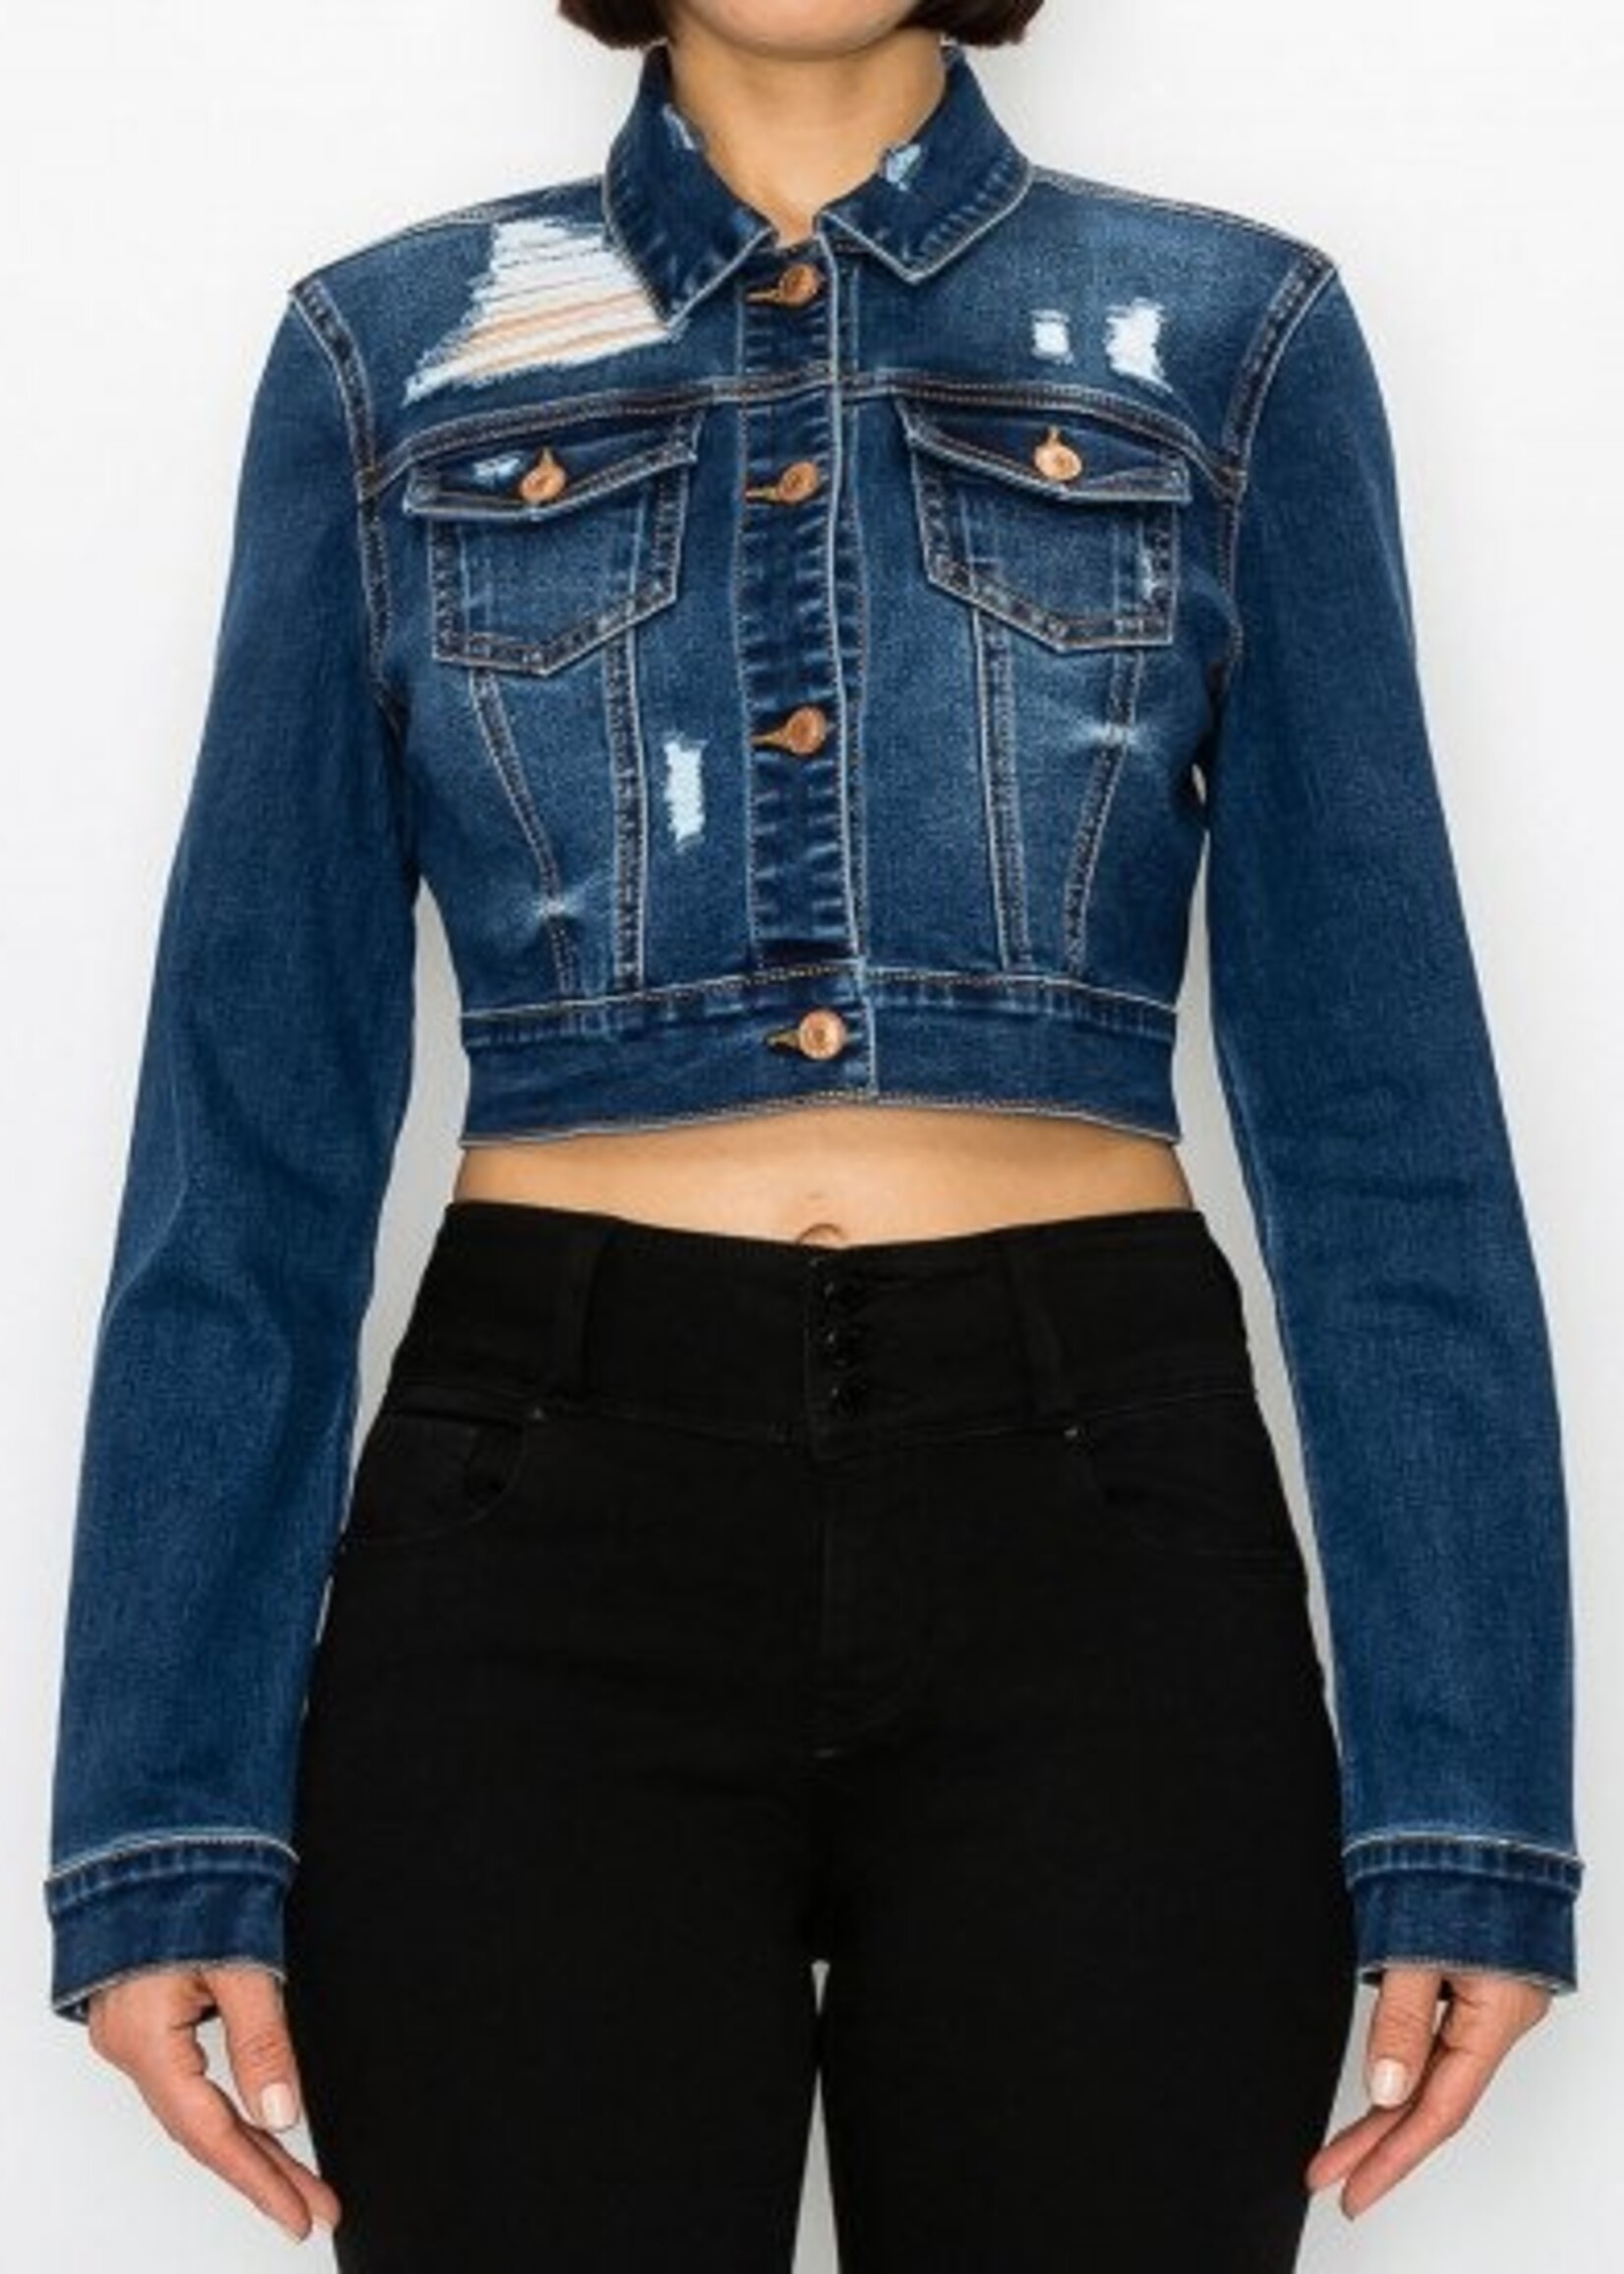 Denim Jackets - Country Outfitter